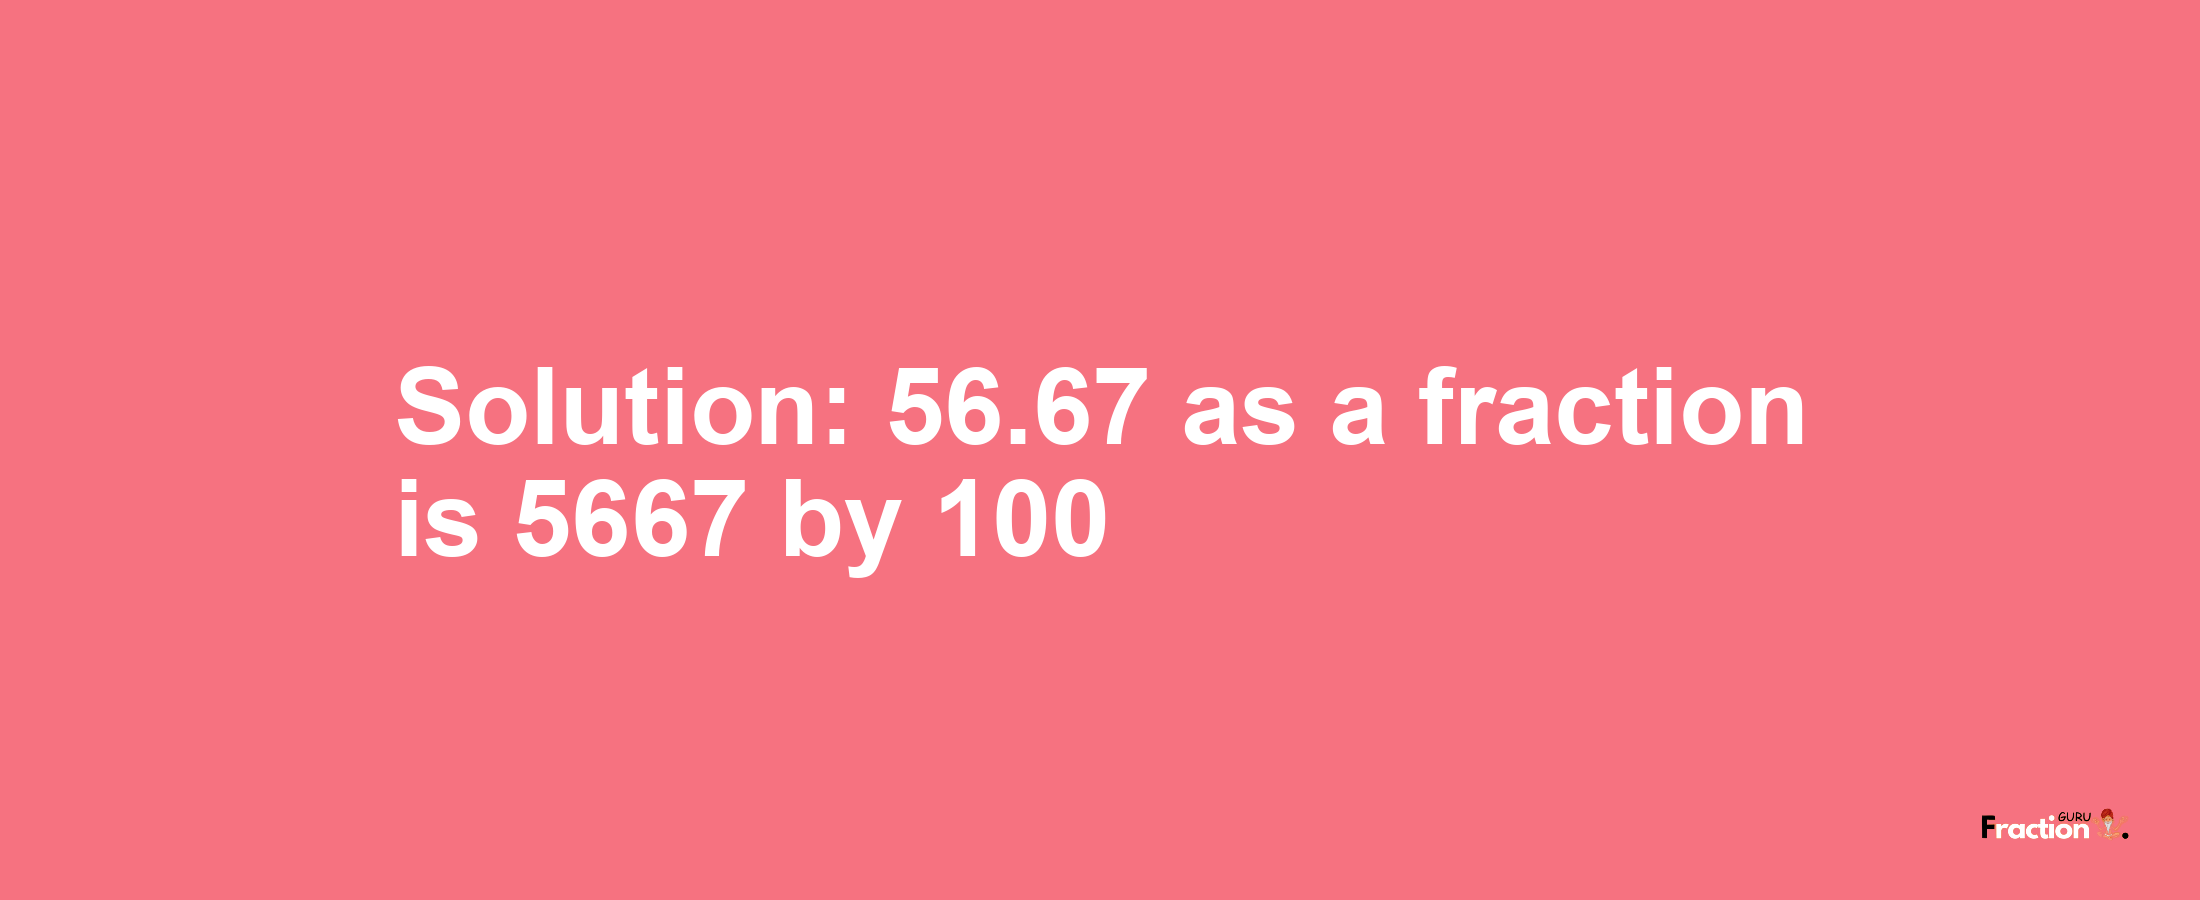 Solution:56.67 as a fraction is 5667/100